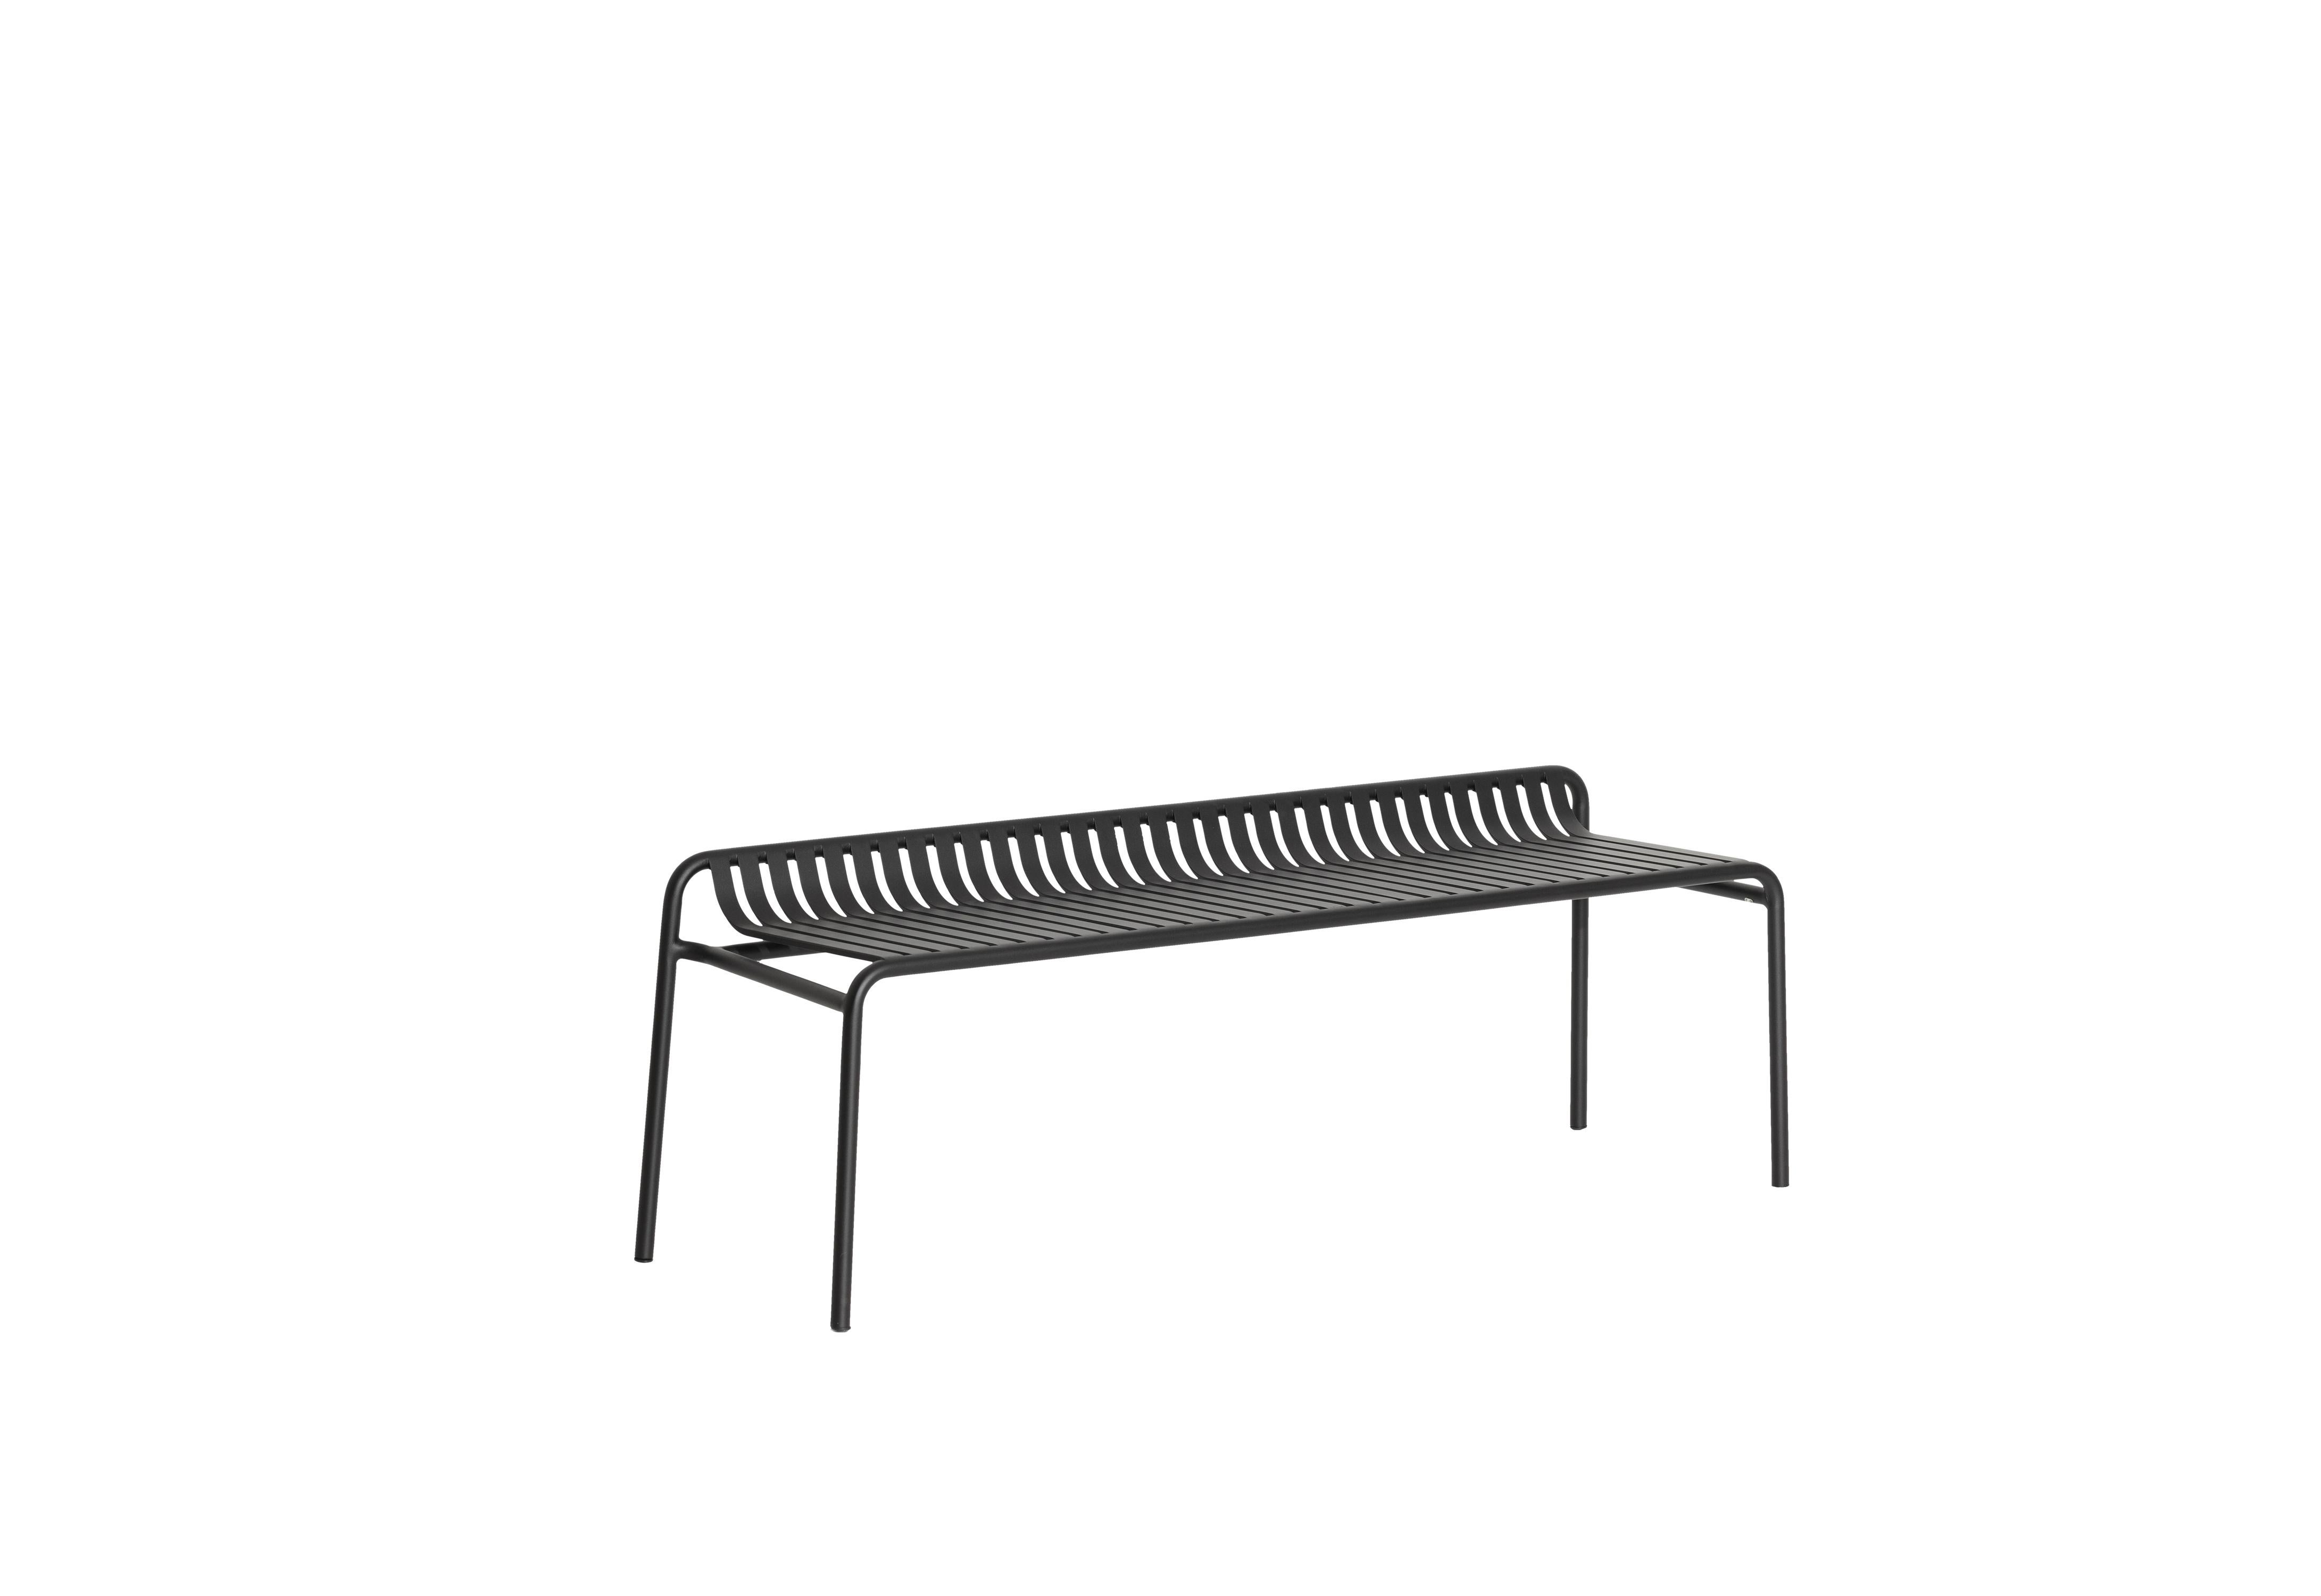 Petite Friture Week-End Bench without Back in Black Aluminium by Studio BrichetZiegler, 2017

The week-end collection is a full range of outdoor furniture, in aluminium grained epoxy paint, matt finish, that includes 18 functions and 8 colours for